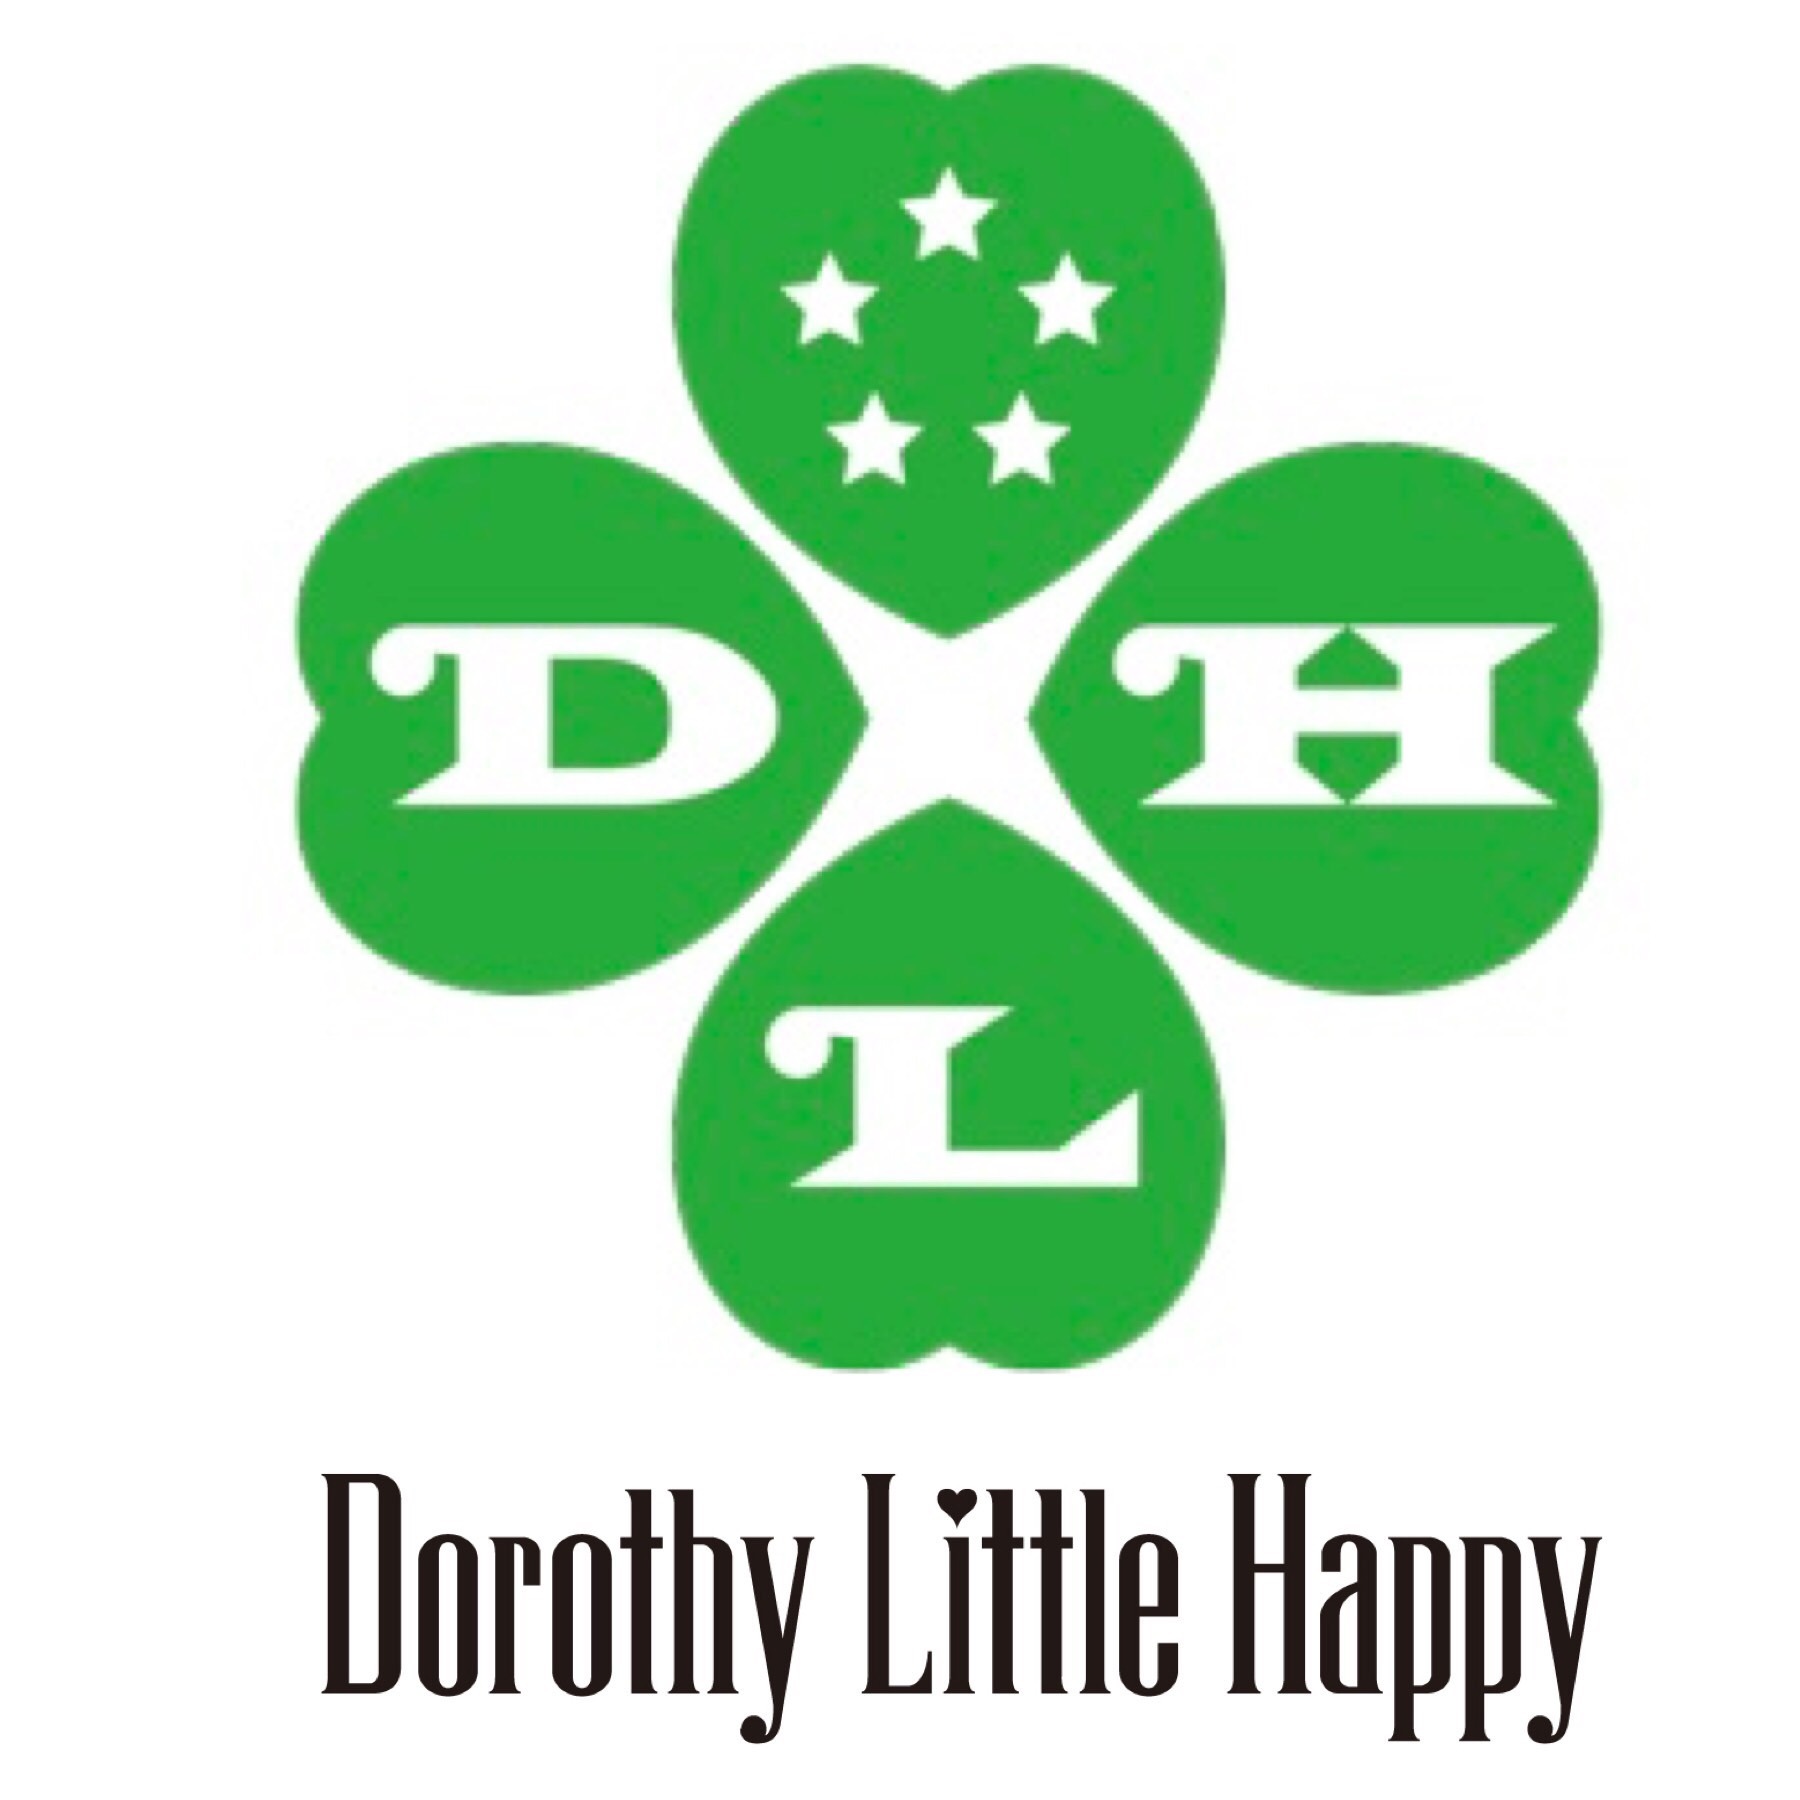 Dorothy Little Happy / official Shop